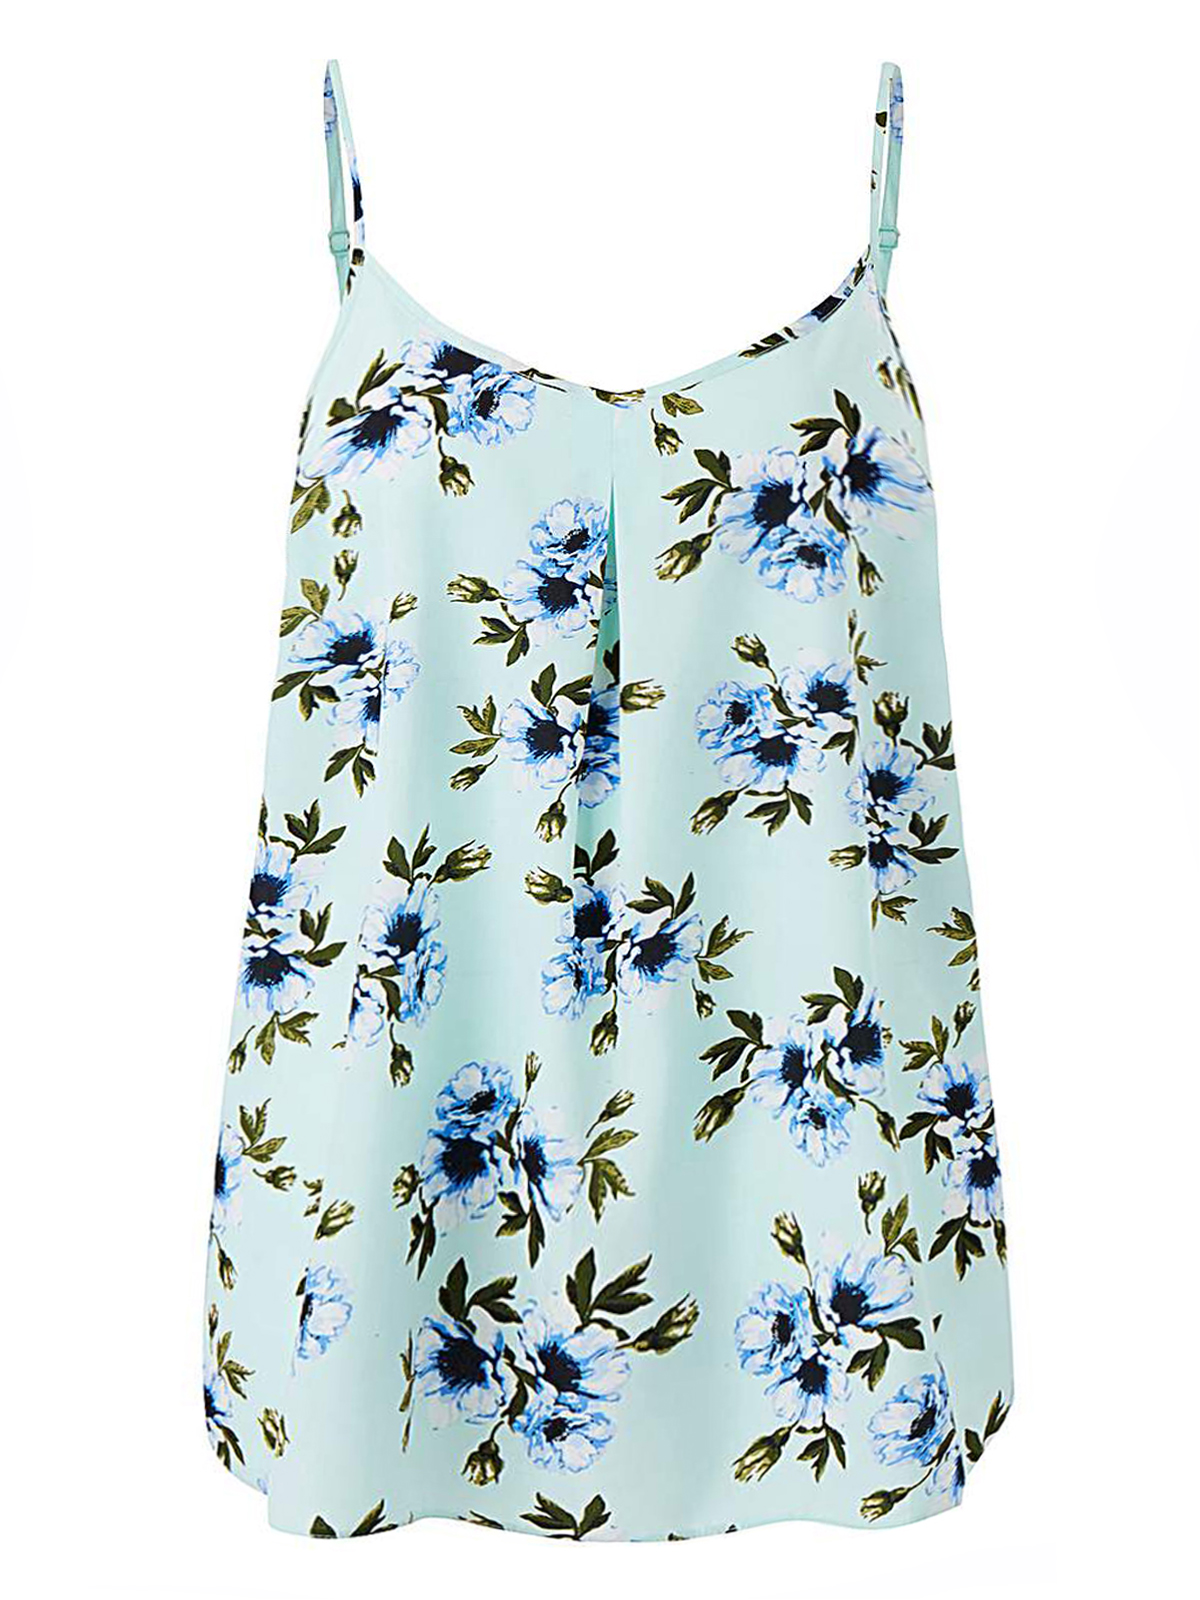 Capsule - - Capsule MINT Floral Print Strappy Cami Top - Plus Size 14 to 26